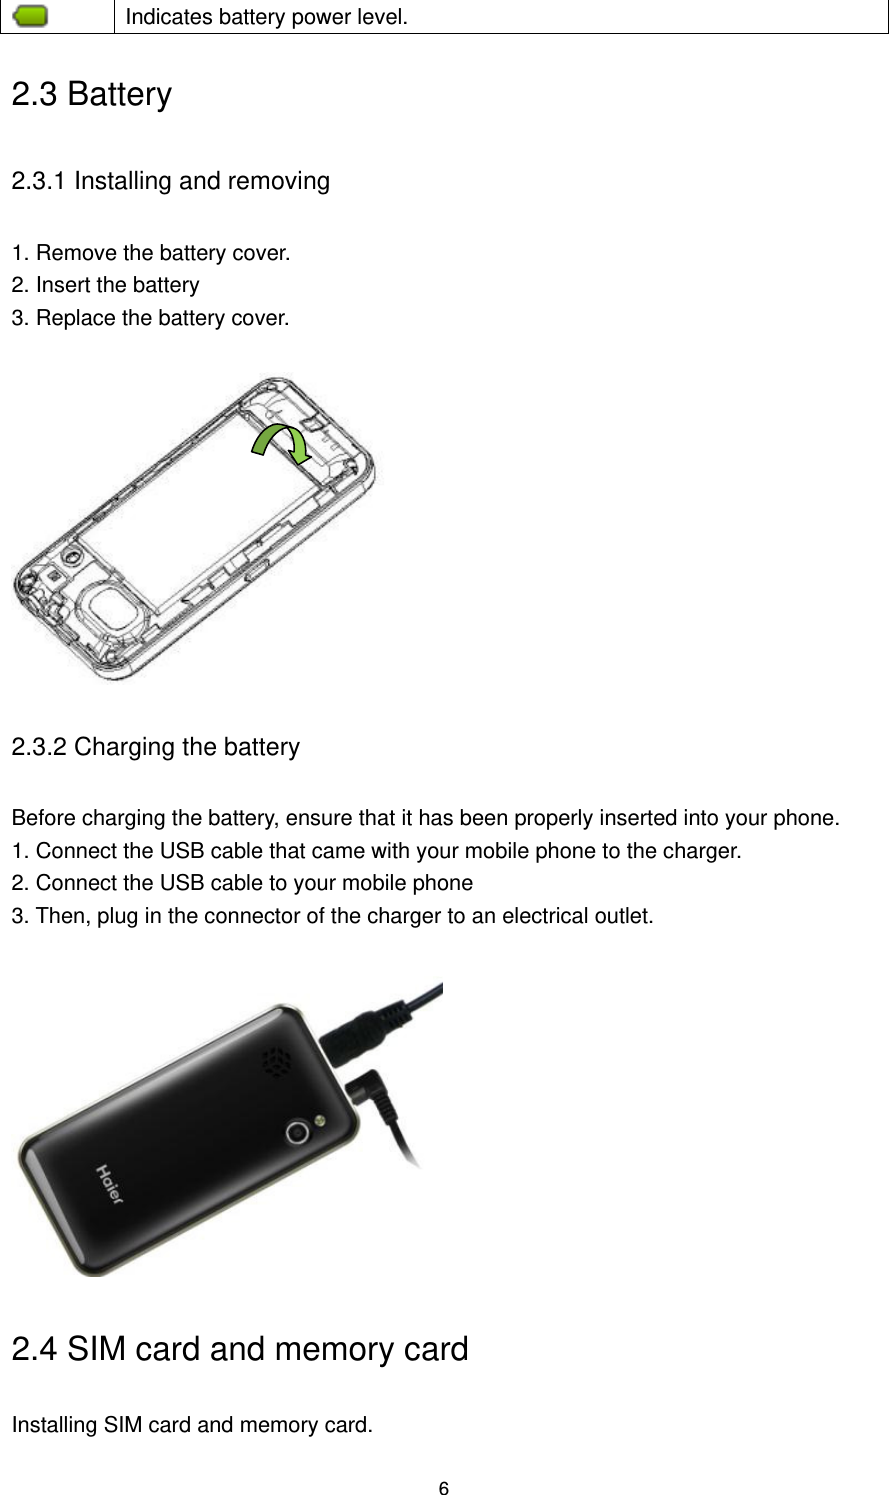 6  Indicates battery power level. 2.3 Battery 2.3.1 Installing and removing 1. Remove the battery cover.   2. Insert the battery 3. Replace the battery cover.       2.3.2 Charging the battery Before charging the battery, ensure that it has been properly inserted into your phone.   1. Connect the USB cable that came with your mobile phone to the charger.   2. Connect the USB cable to your mobile phone 3. Then, plug in the connector of the charger to an electrical outlet.   2.4 SIM card and memory card Installing SIM card and memory card. 